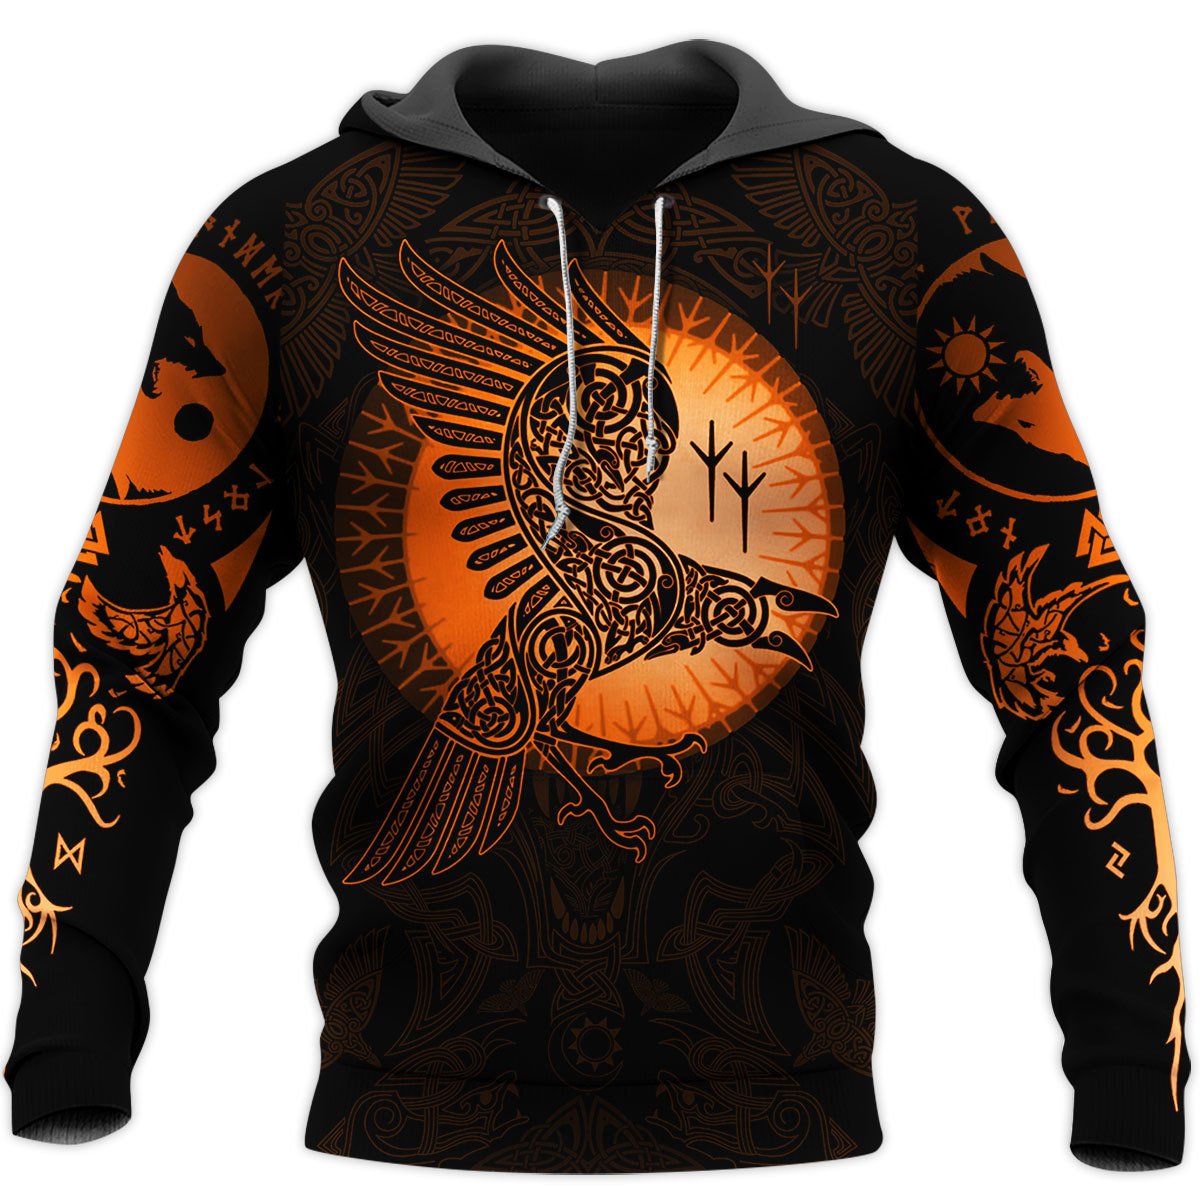 Beautiful Viking Tattoo Raven 3D All Over Printed hoodie and sweatshirt – Teasearch3d 021120